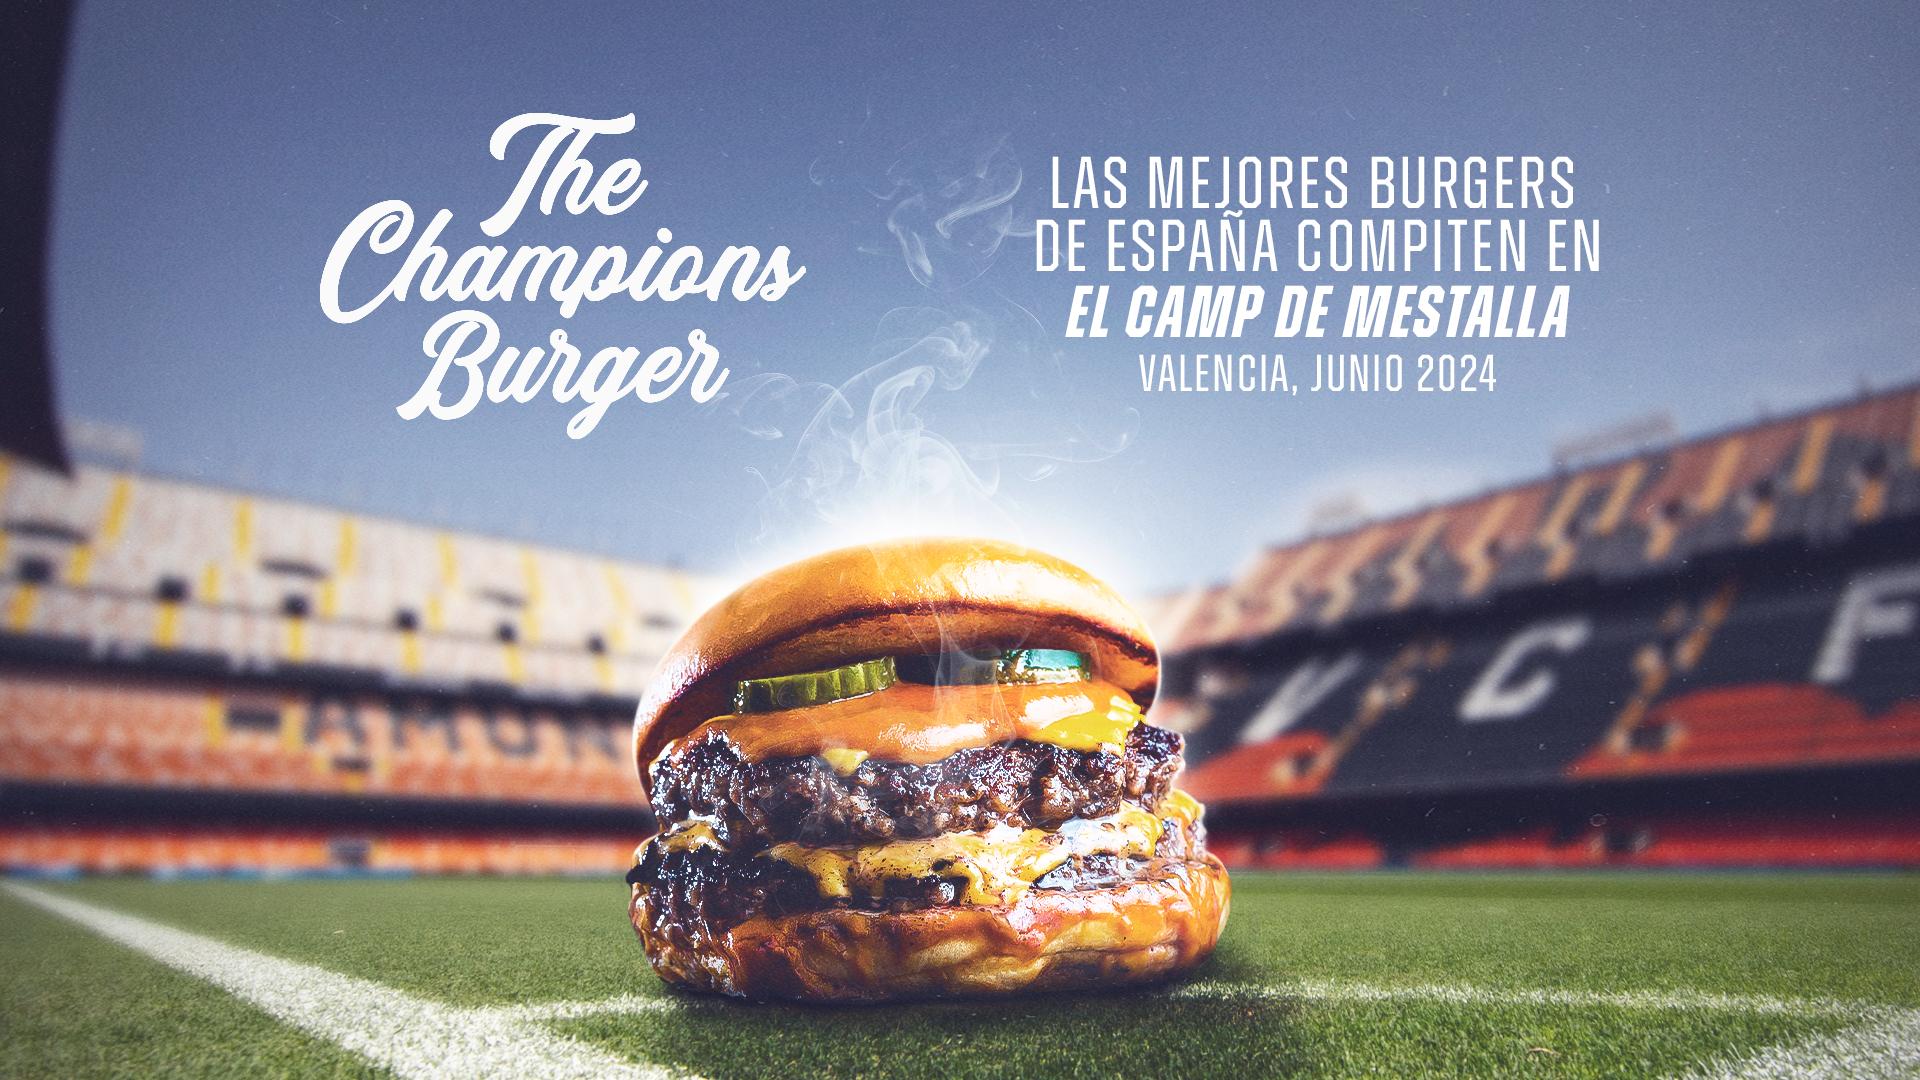 Champions Burger Valencia 2024: Dates, location and all the ways to get there